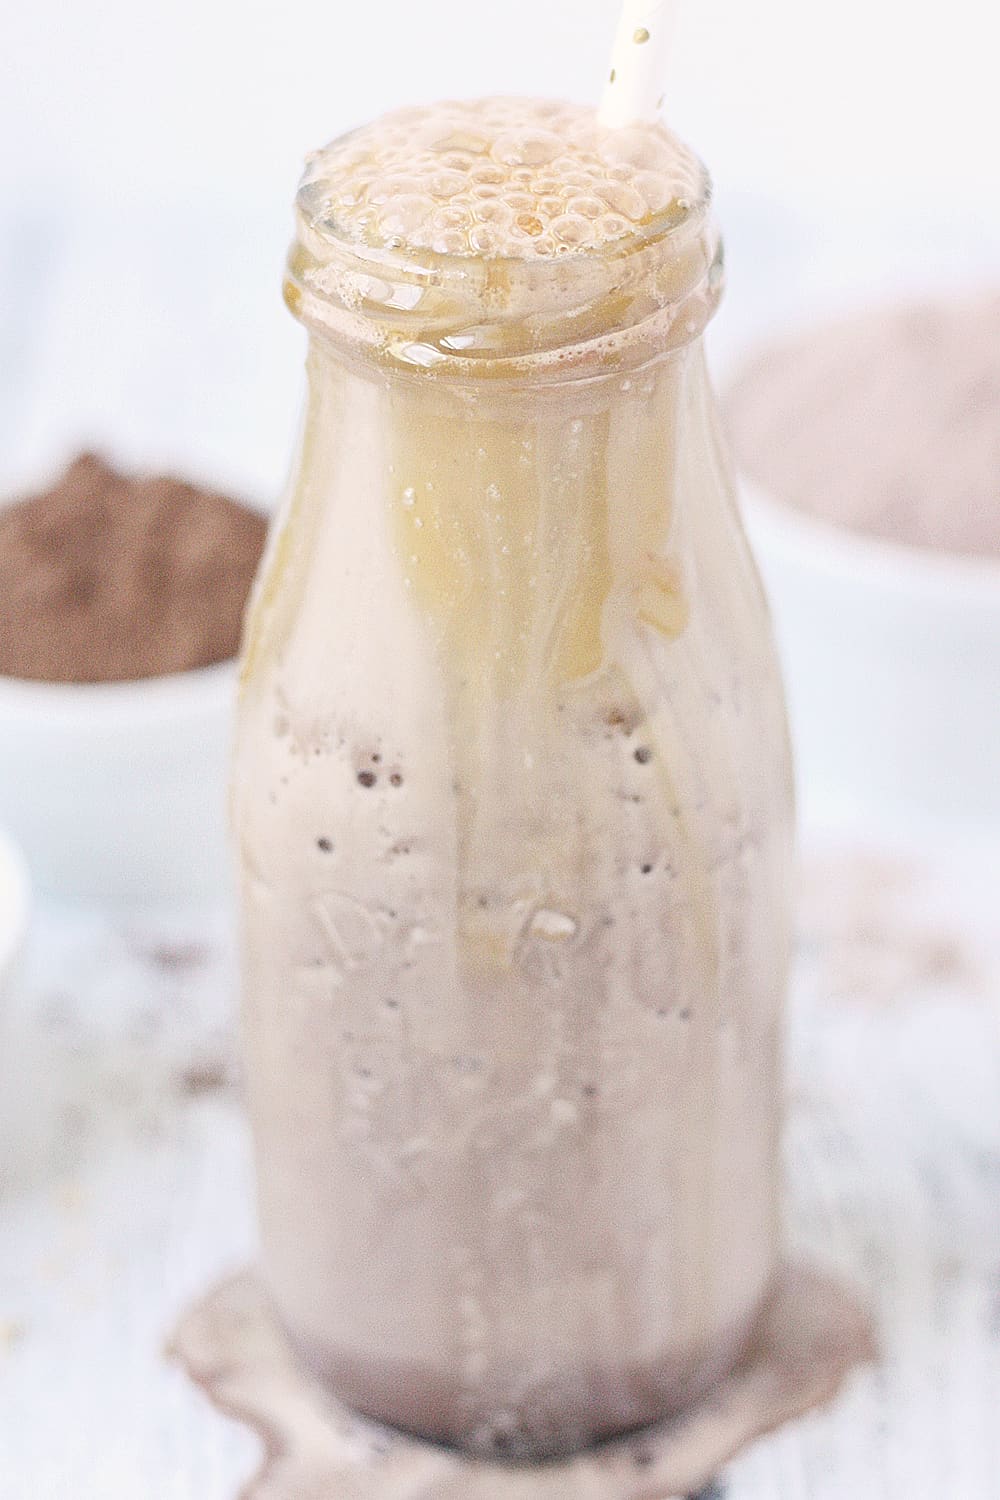 Healthy Chocolate Caramel Peanut Butter Smoothie